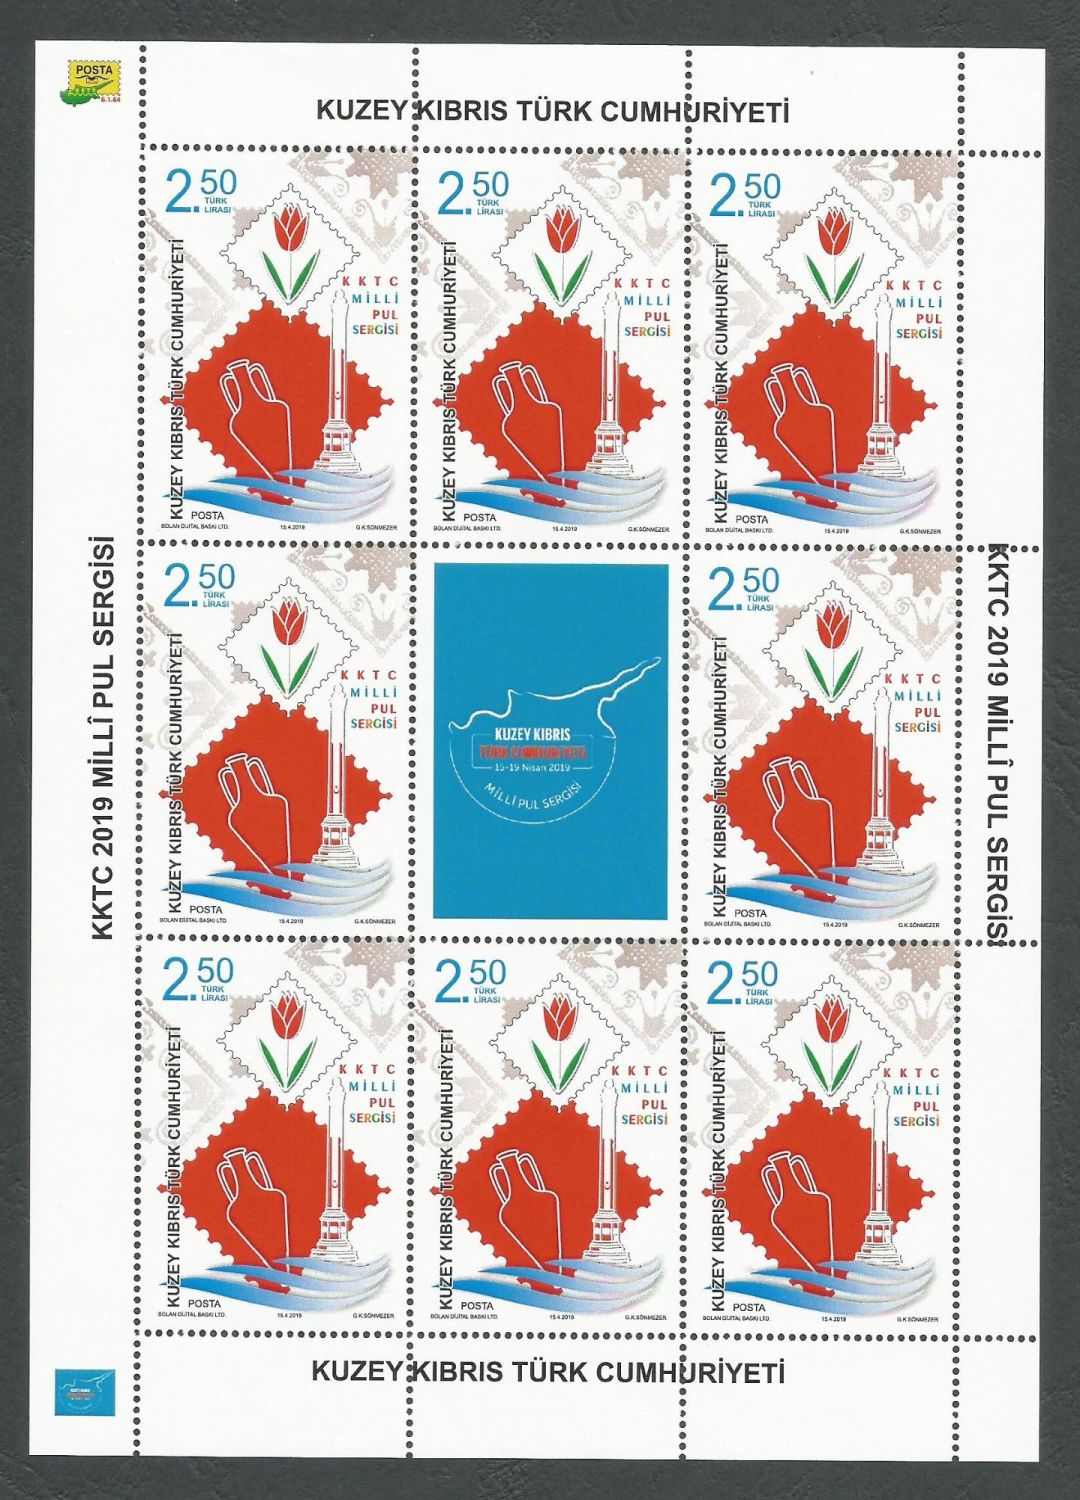 North Cyprus Stamps SG 2019 (b) TRNC National Stamp Exhibition - Full sheet